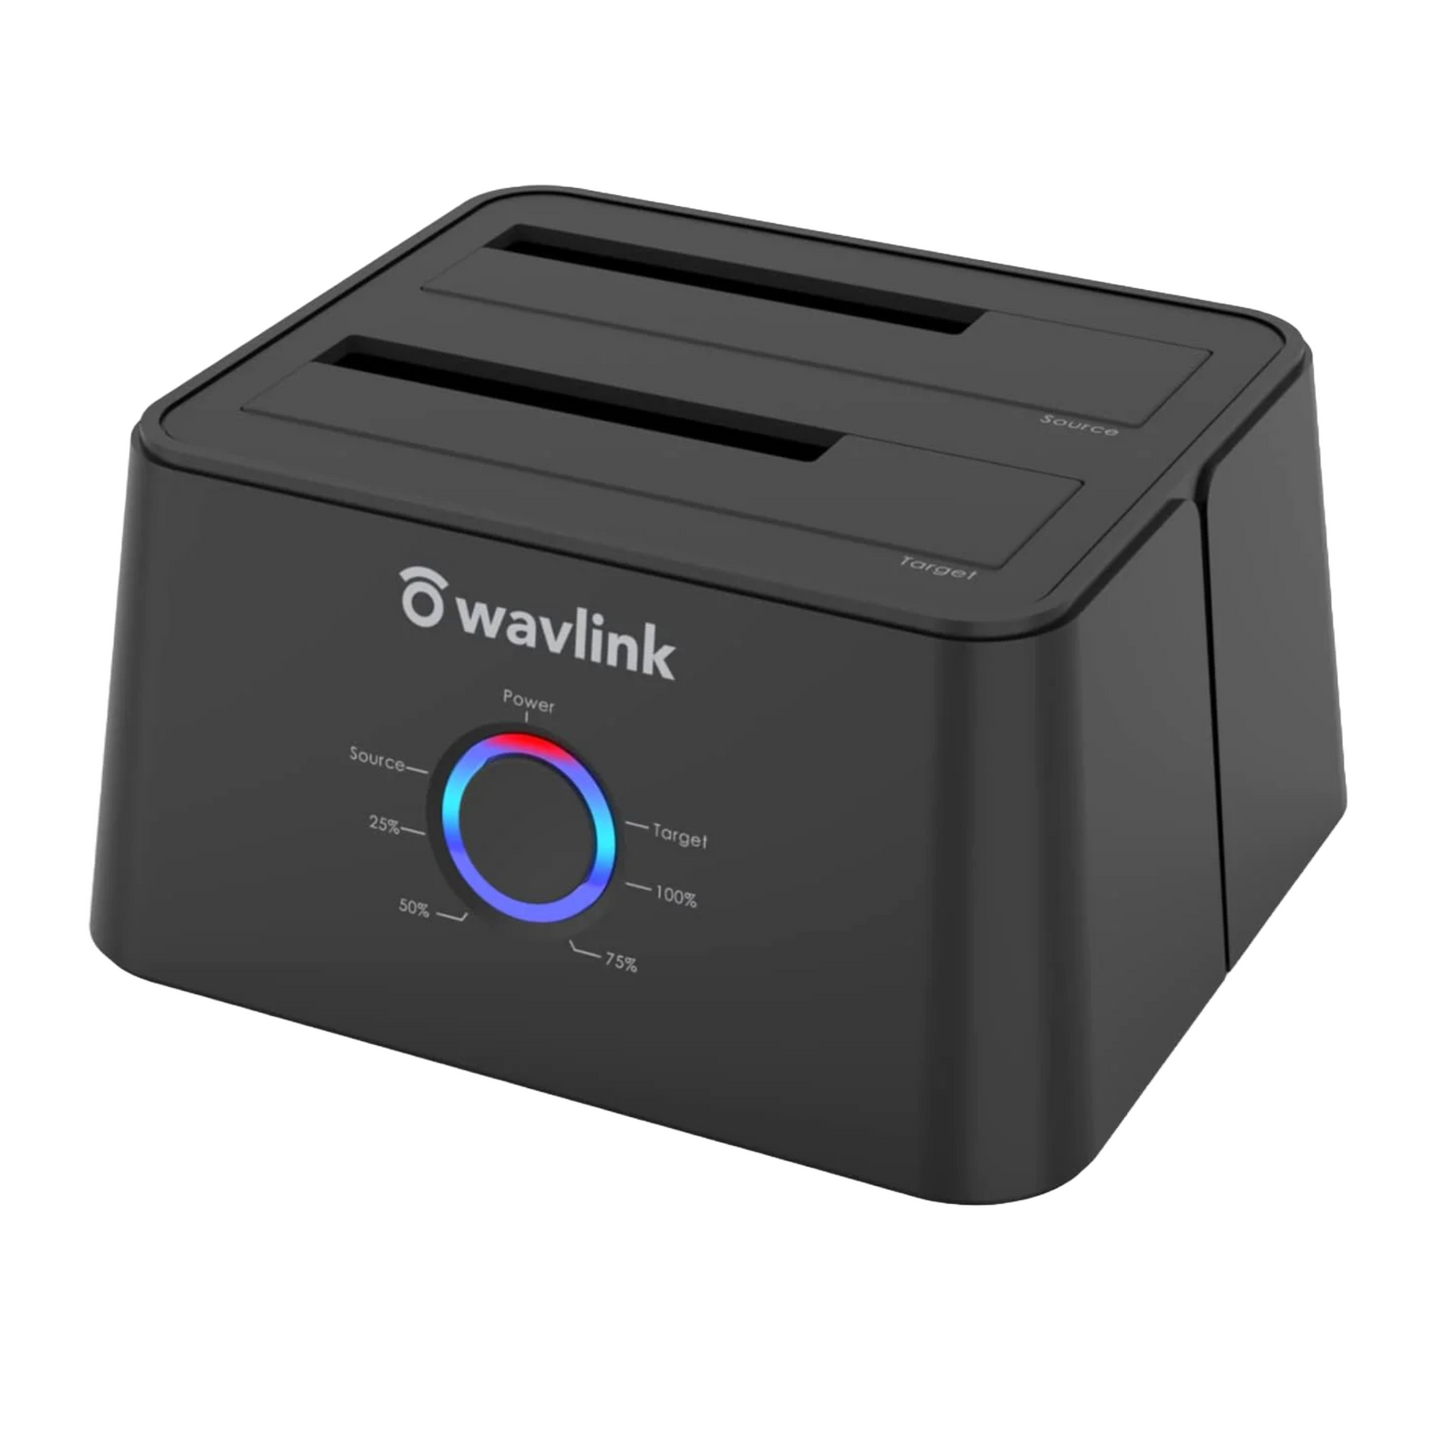 WAVLINK Dual Bay Hard Drive Dock, USB 3.0 to SATA HDD Docking Station for 2.5/3.5 Inch HDD SSD, Support Offline Clone/Backup/UASP